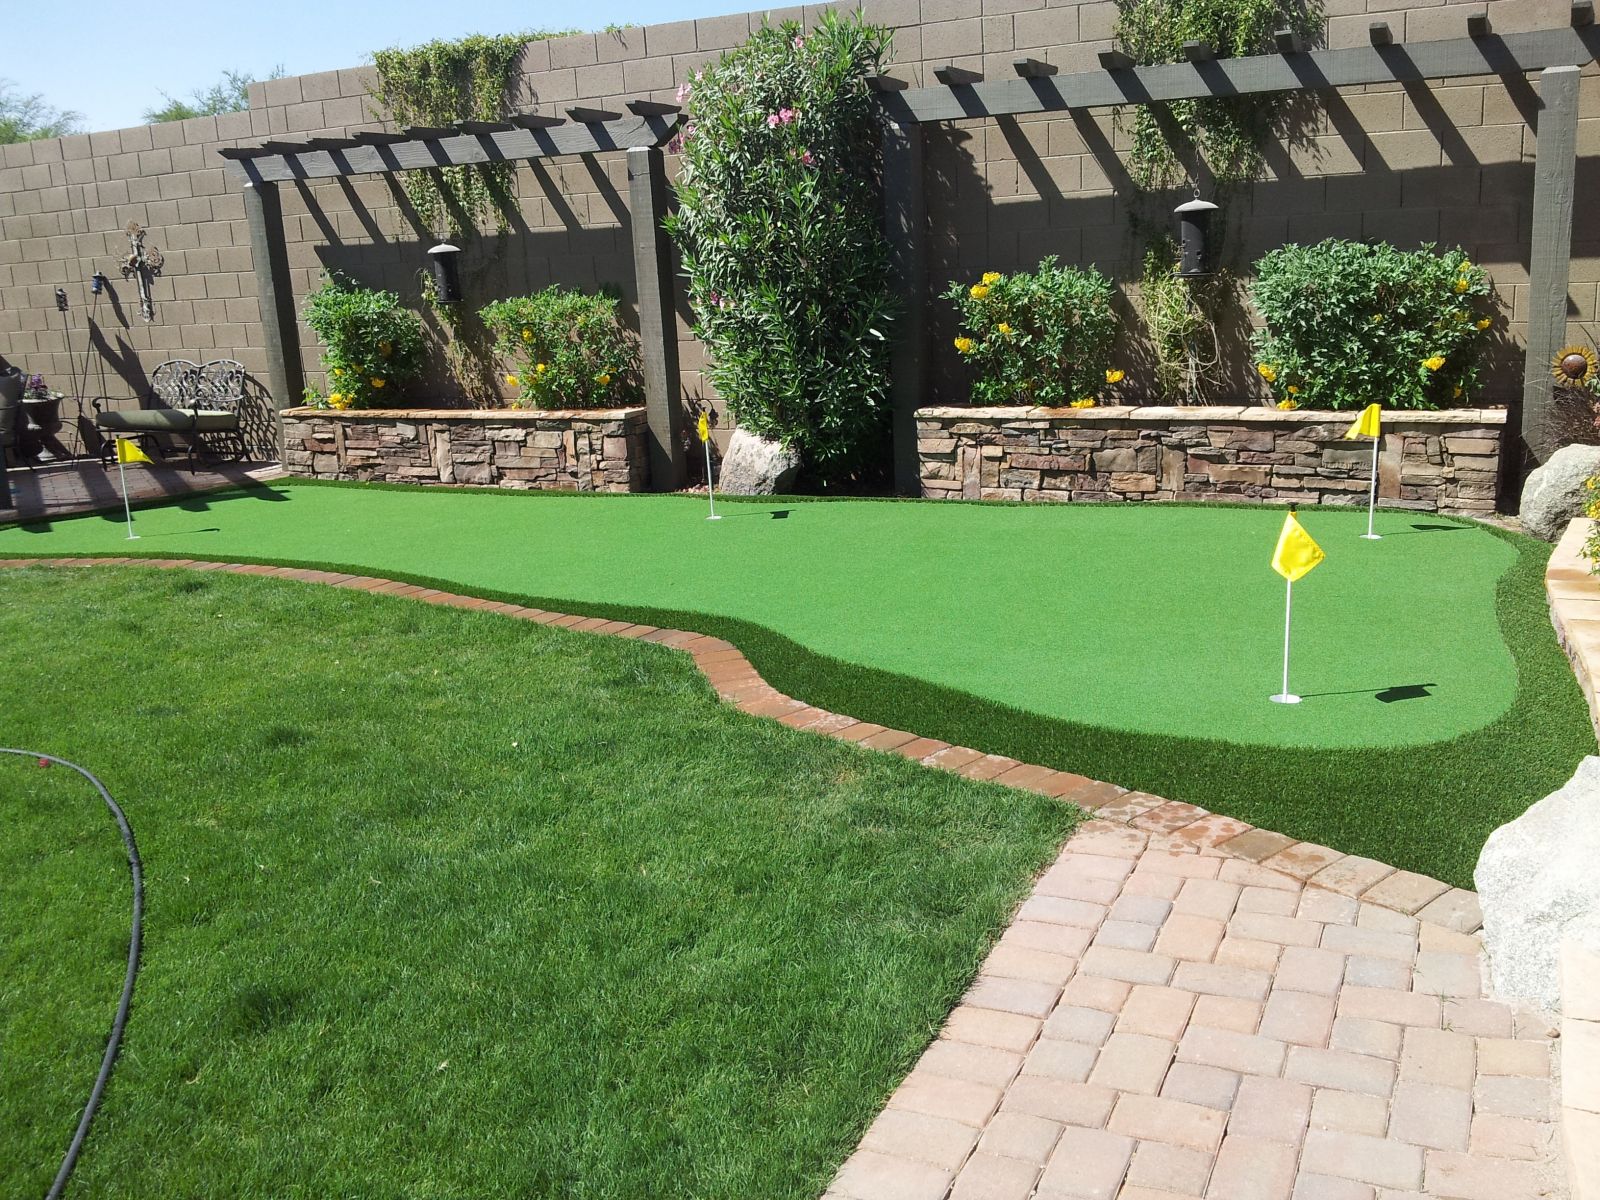 Chandler Fake Grass. Artificial Turf Solves Drainage Issues